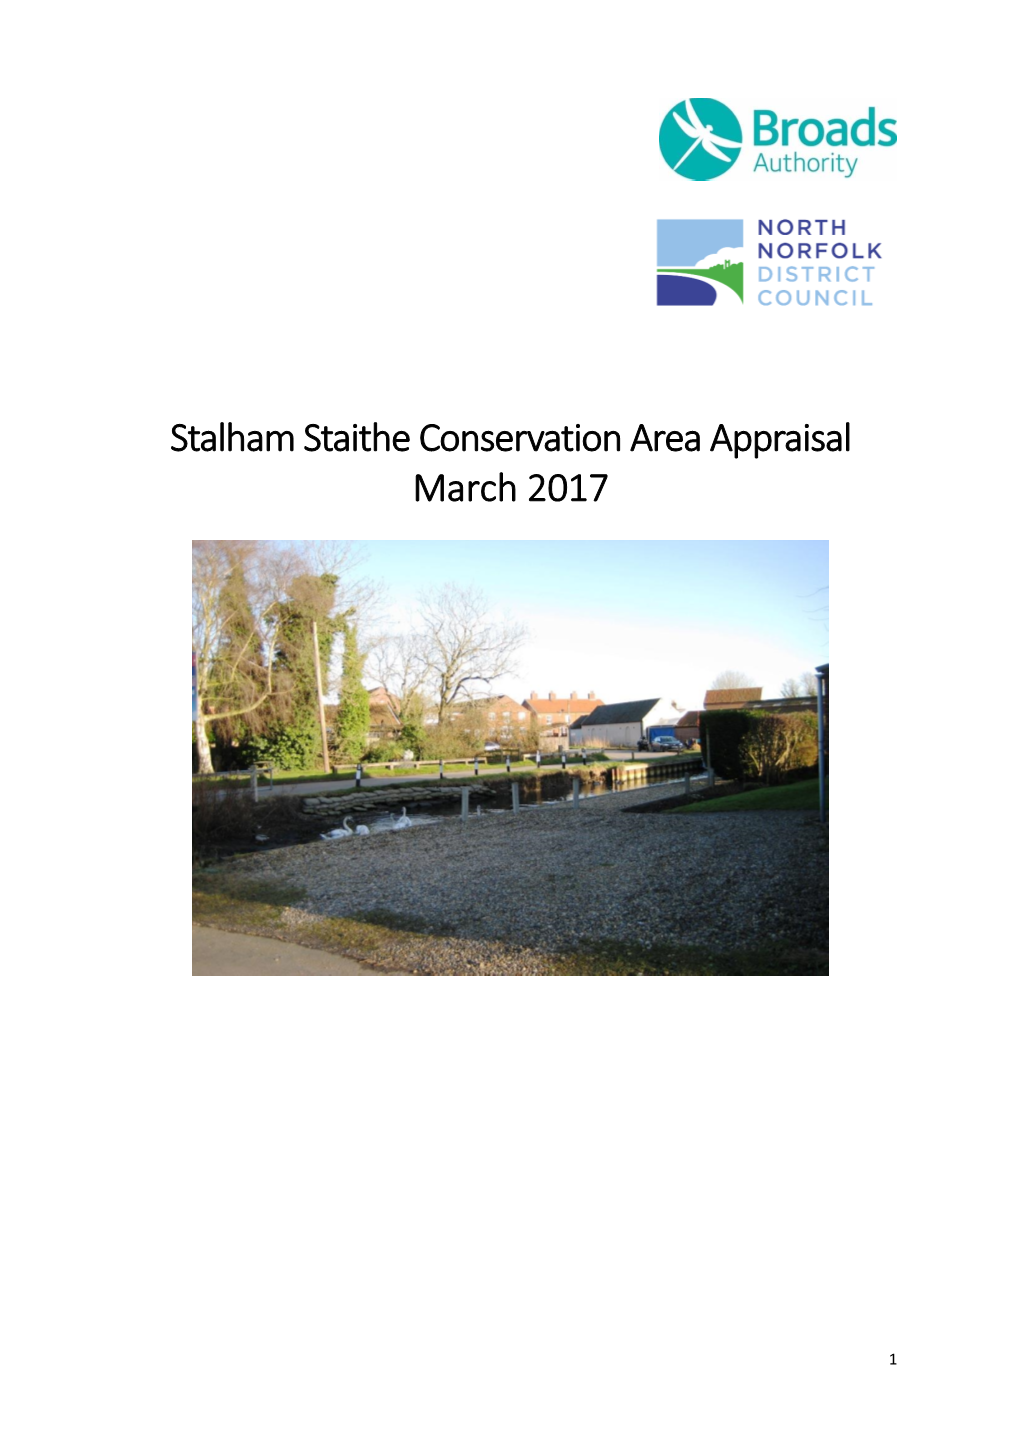 Stalham Staithe Conservation Area Appraisal March 2017